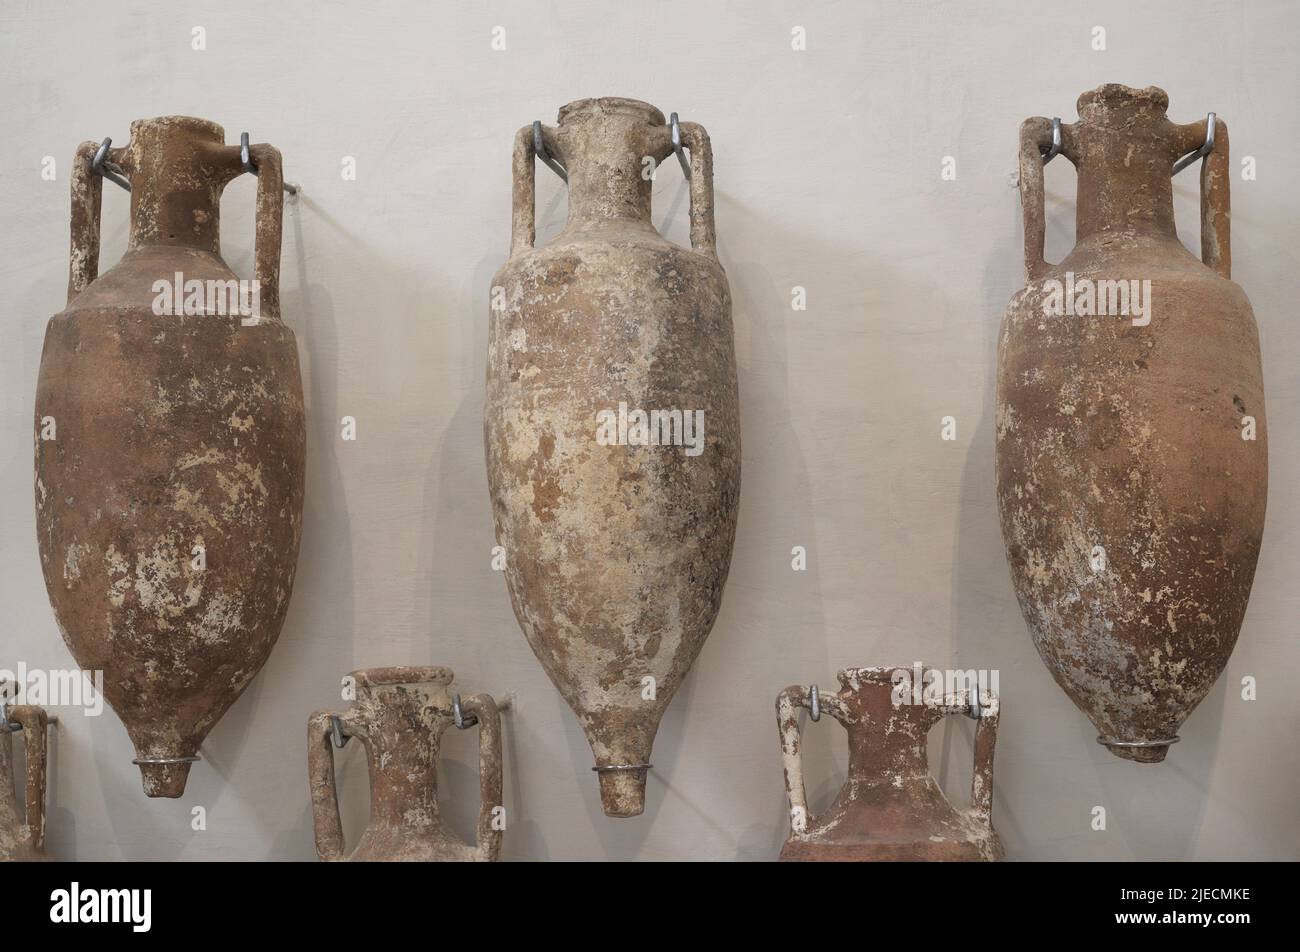 Early Roman Period. Italic amphorae used for the transportation of wine (vinariae) between the 2nd and the 1st century BC. Found in 1961 at the site of a shipwreck during the 2nd century BC, at the mouth of Xlendi bay, Gozo Island. Gozo Museum of Archaeology. Cittadela of Victoria in Gozo. Malta. Stock Photo